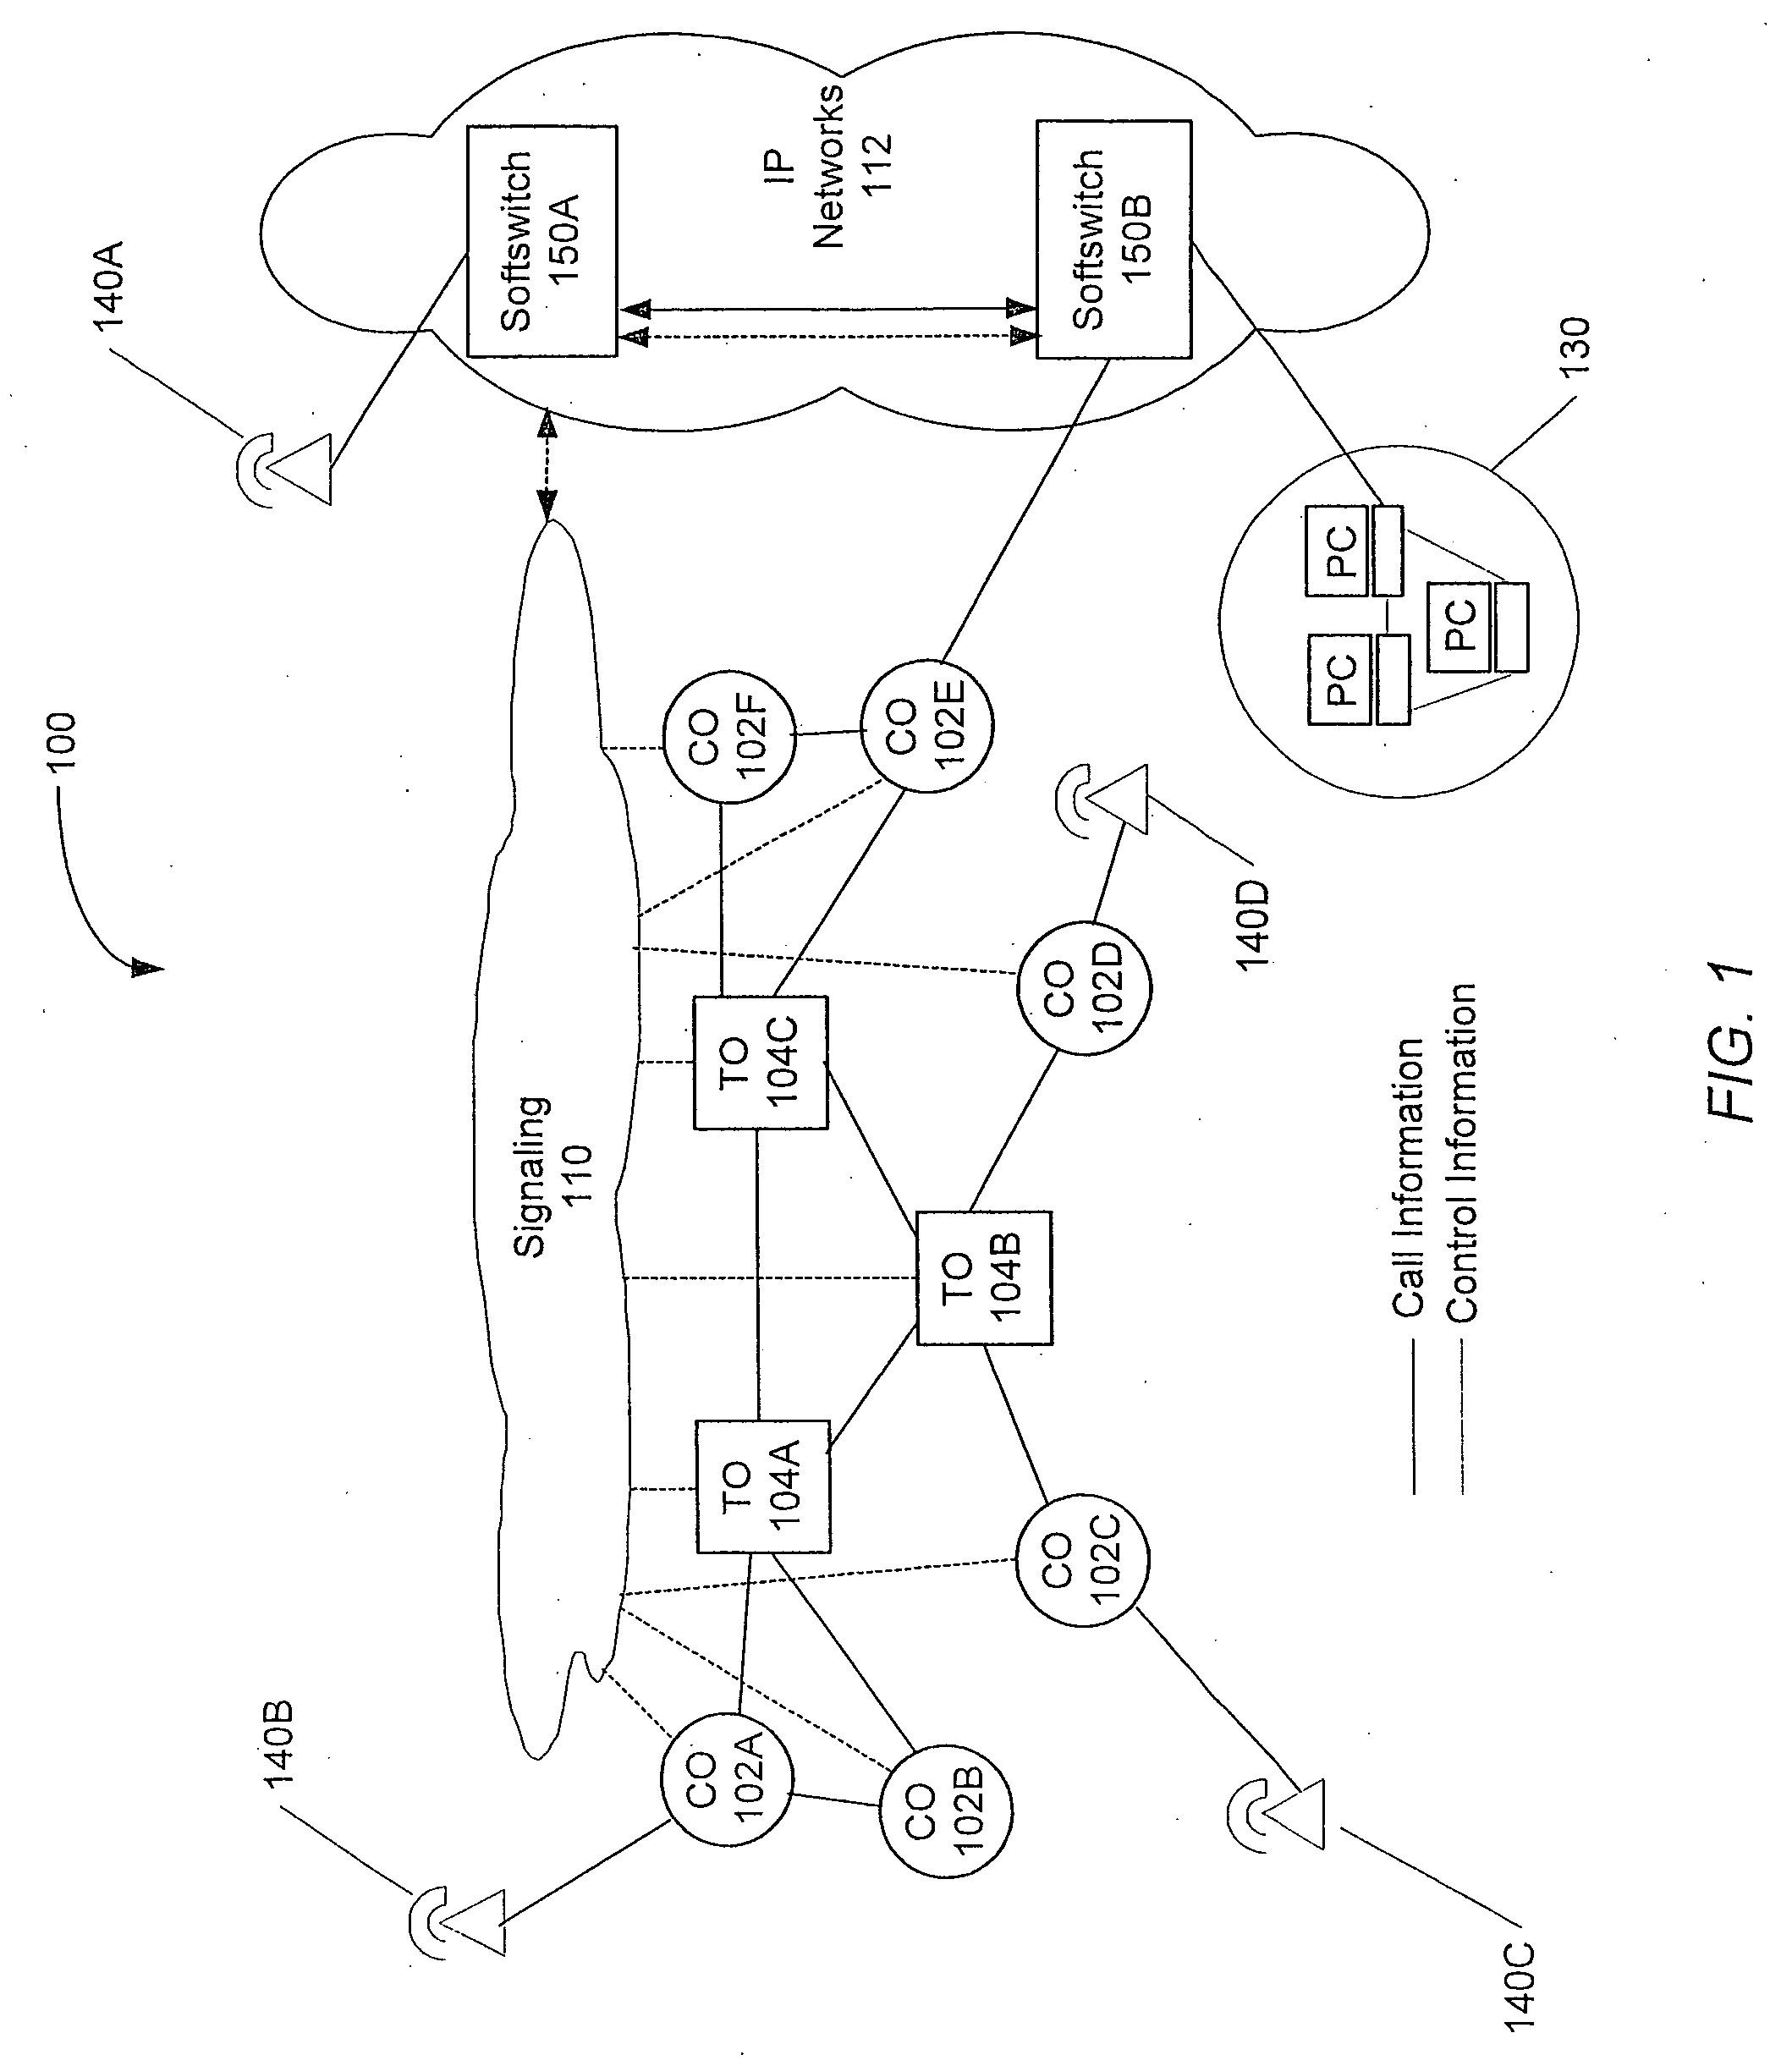 System and method for managing telecommunications